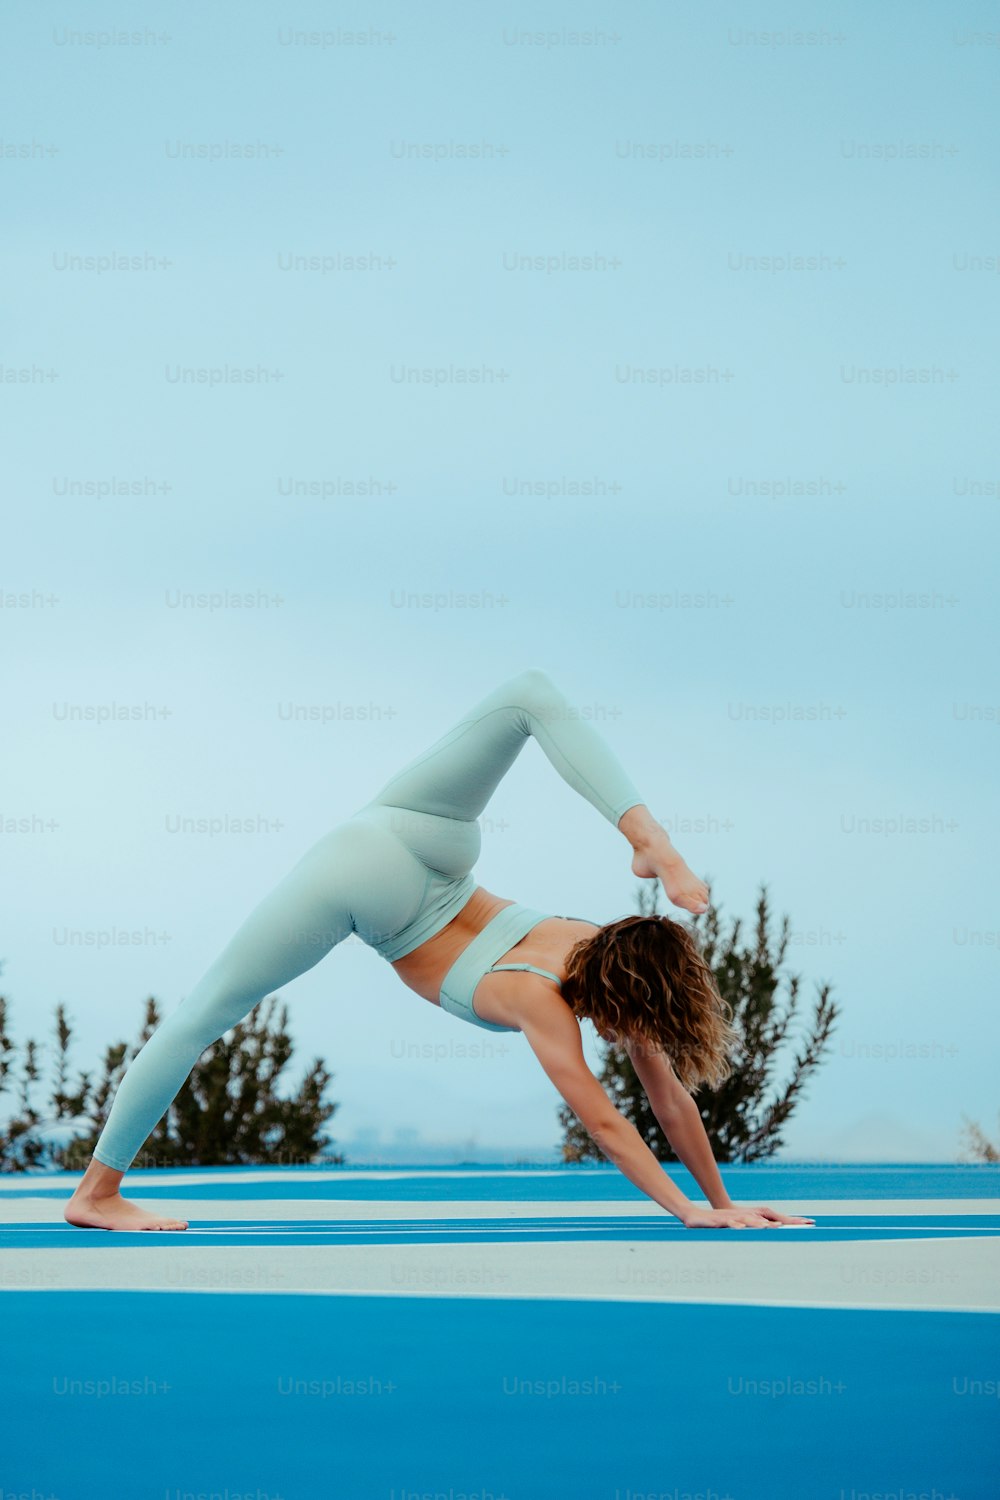 a woman doing a yoga pose on a blue surface